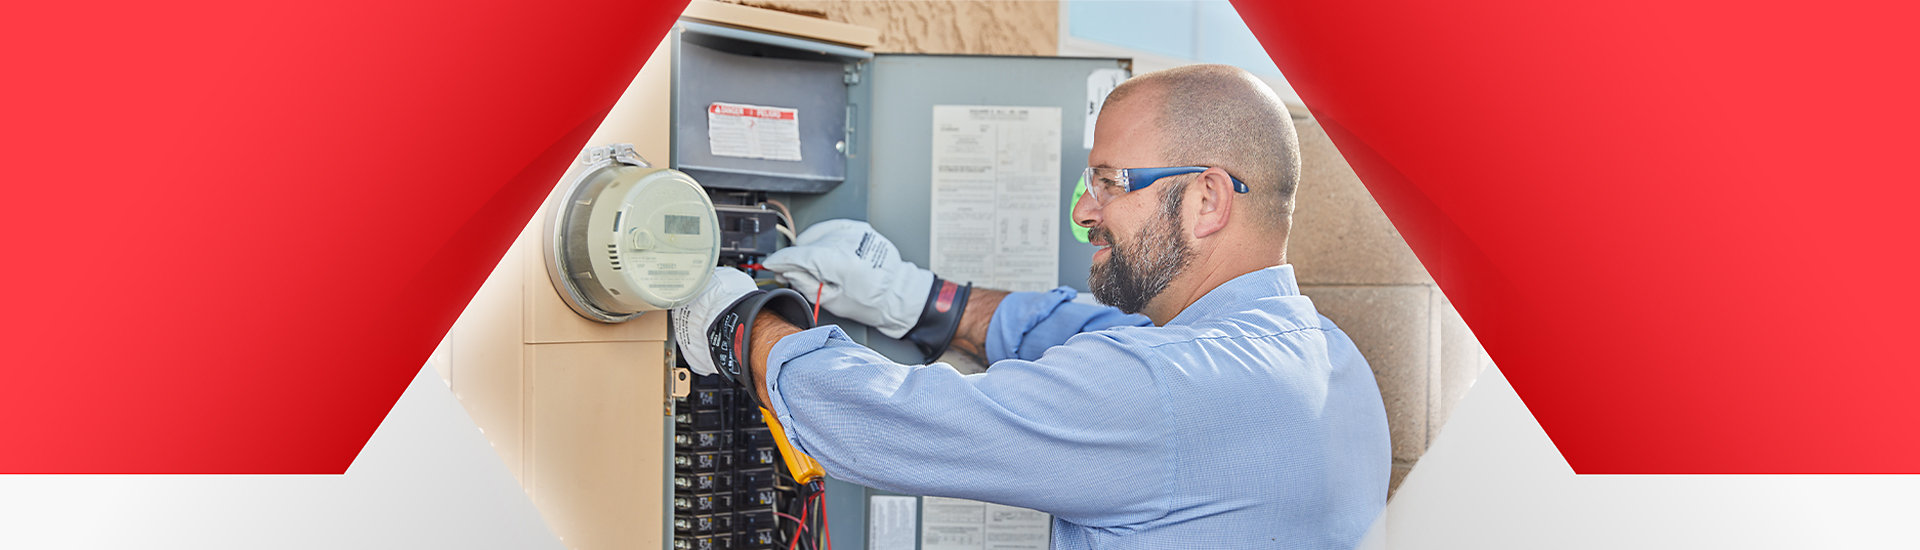 Electrical panel being inspected by an electrician